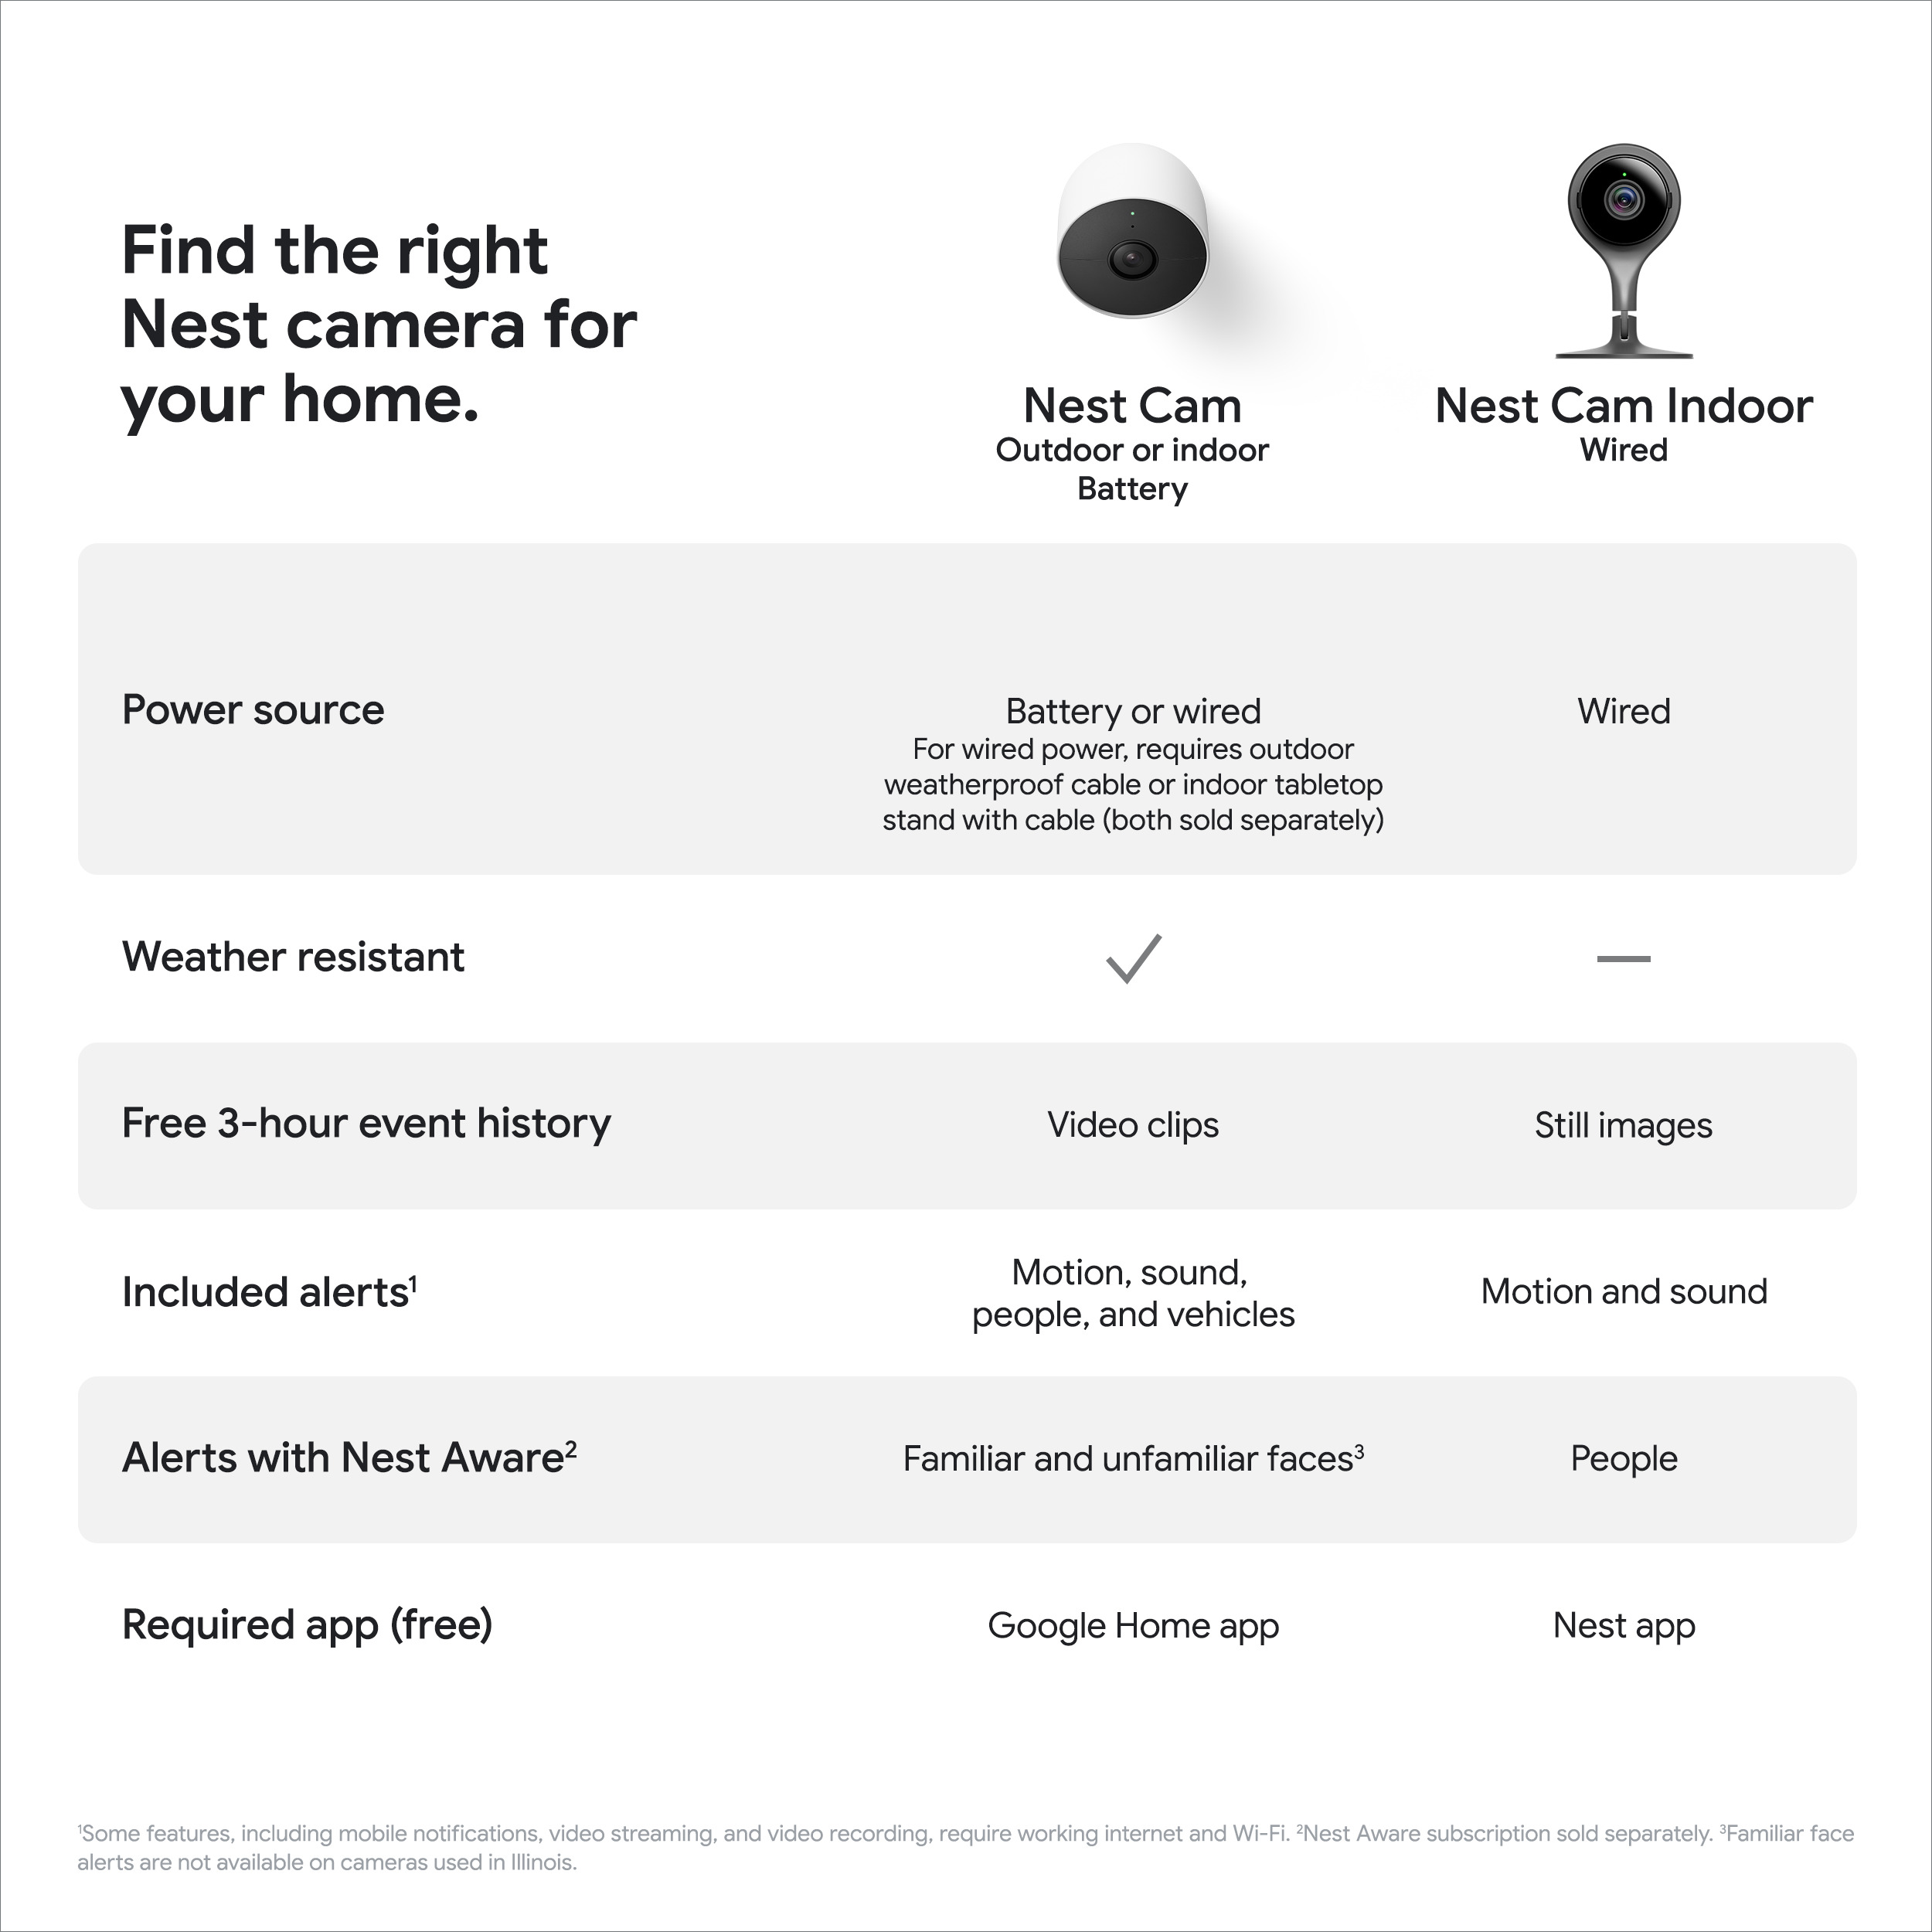 Nest Camera (outdoor or indoor, battery) 1pk White - image 9 of 18